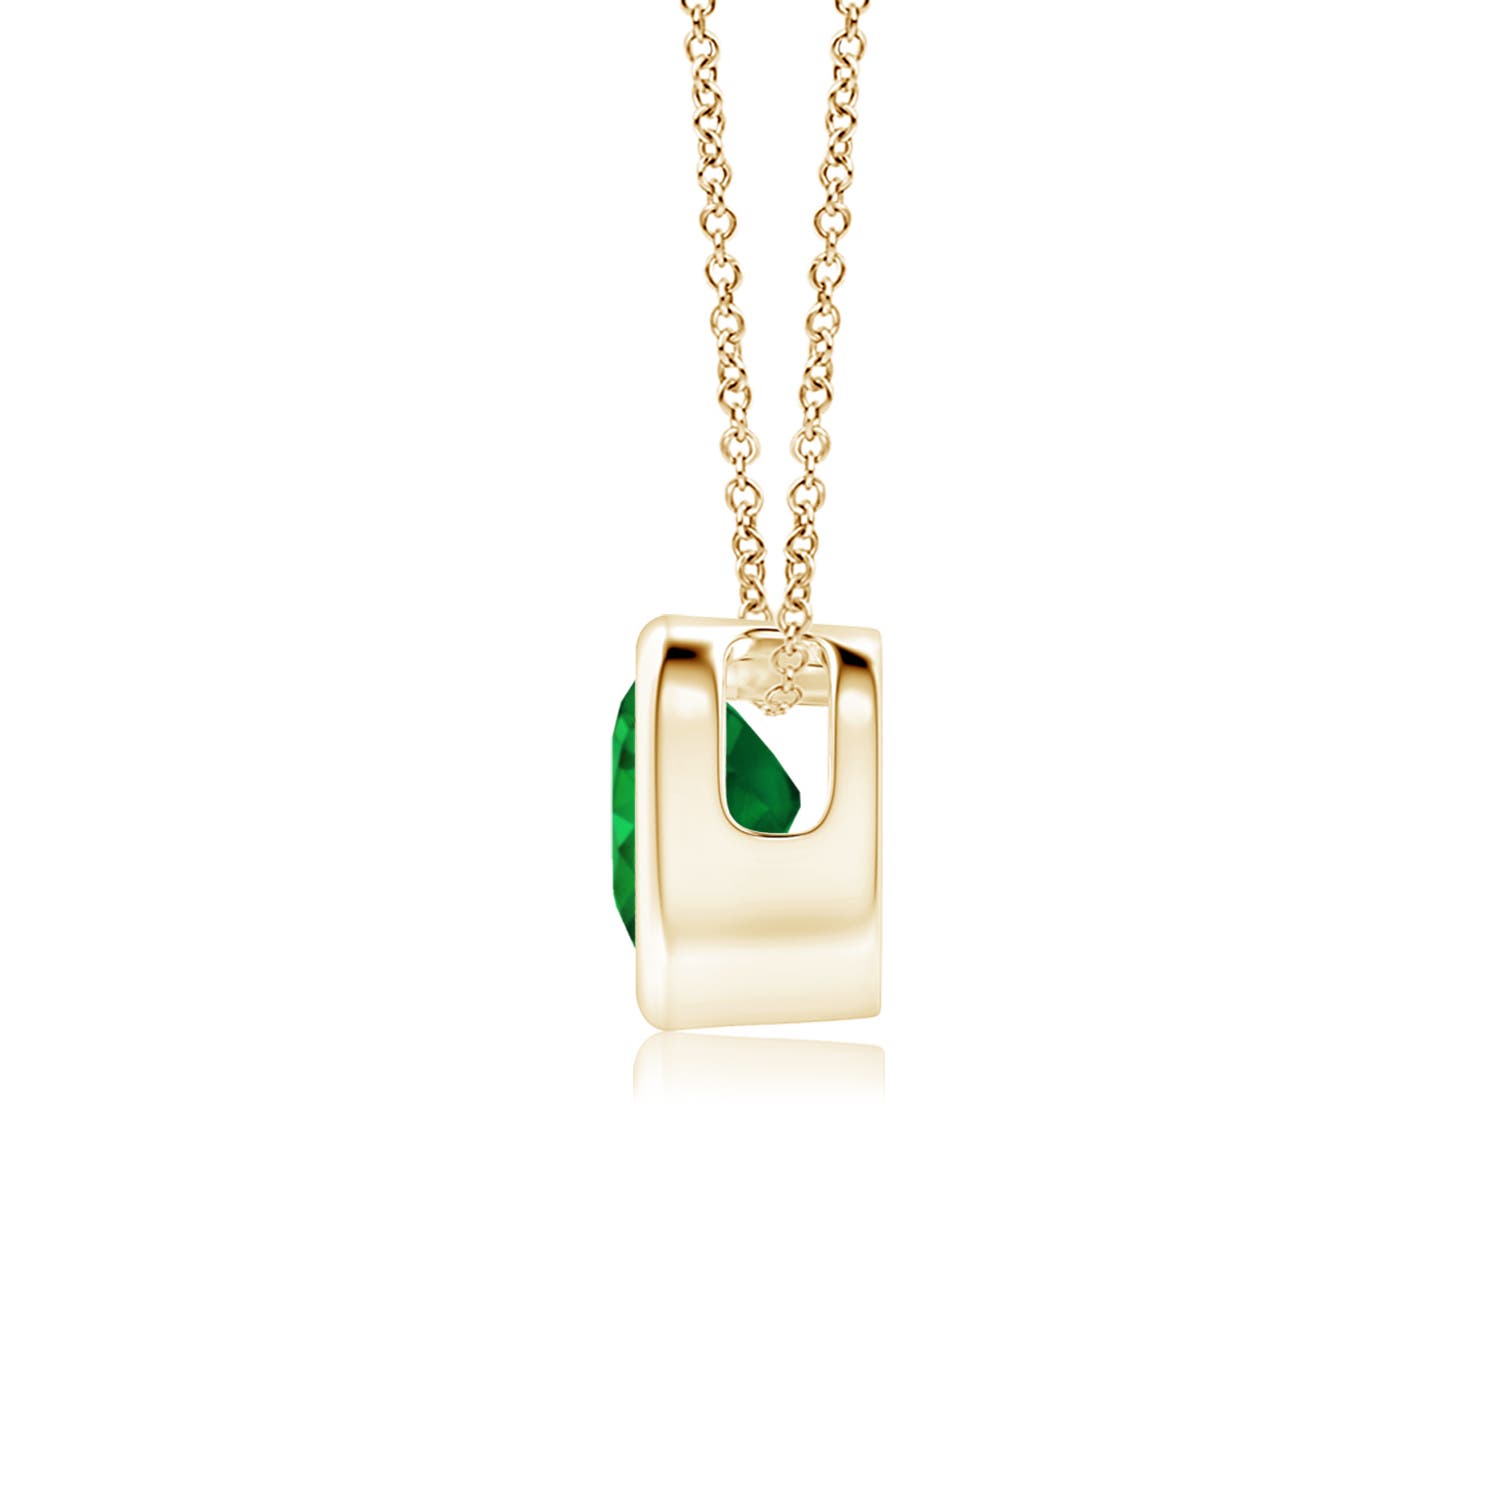 AAA - Emerald / 0.2 CT / 14 KT Yellow Gold